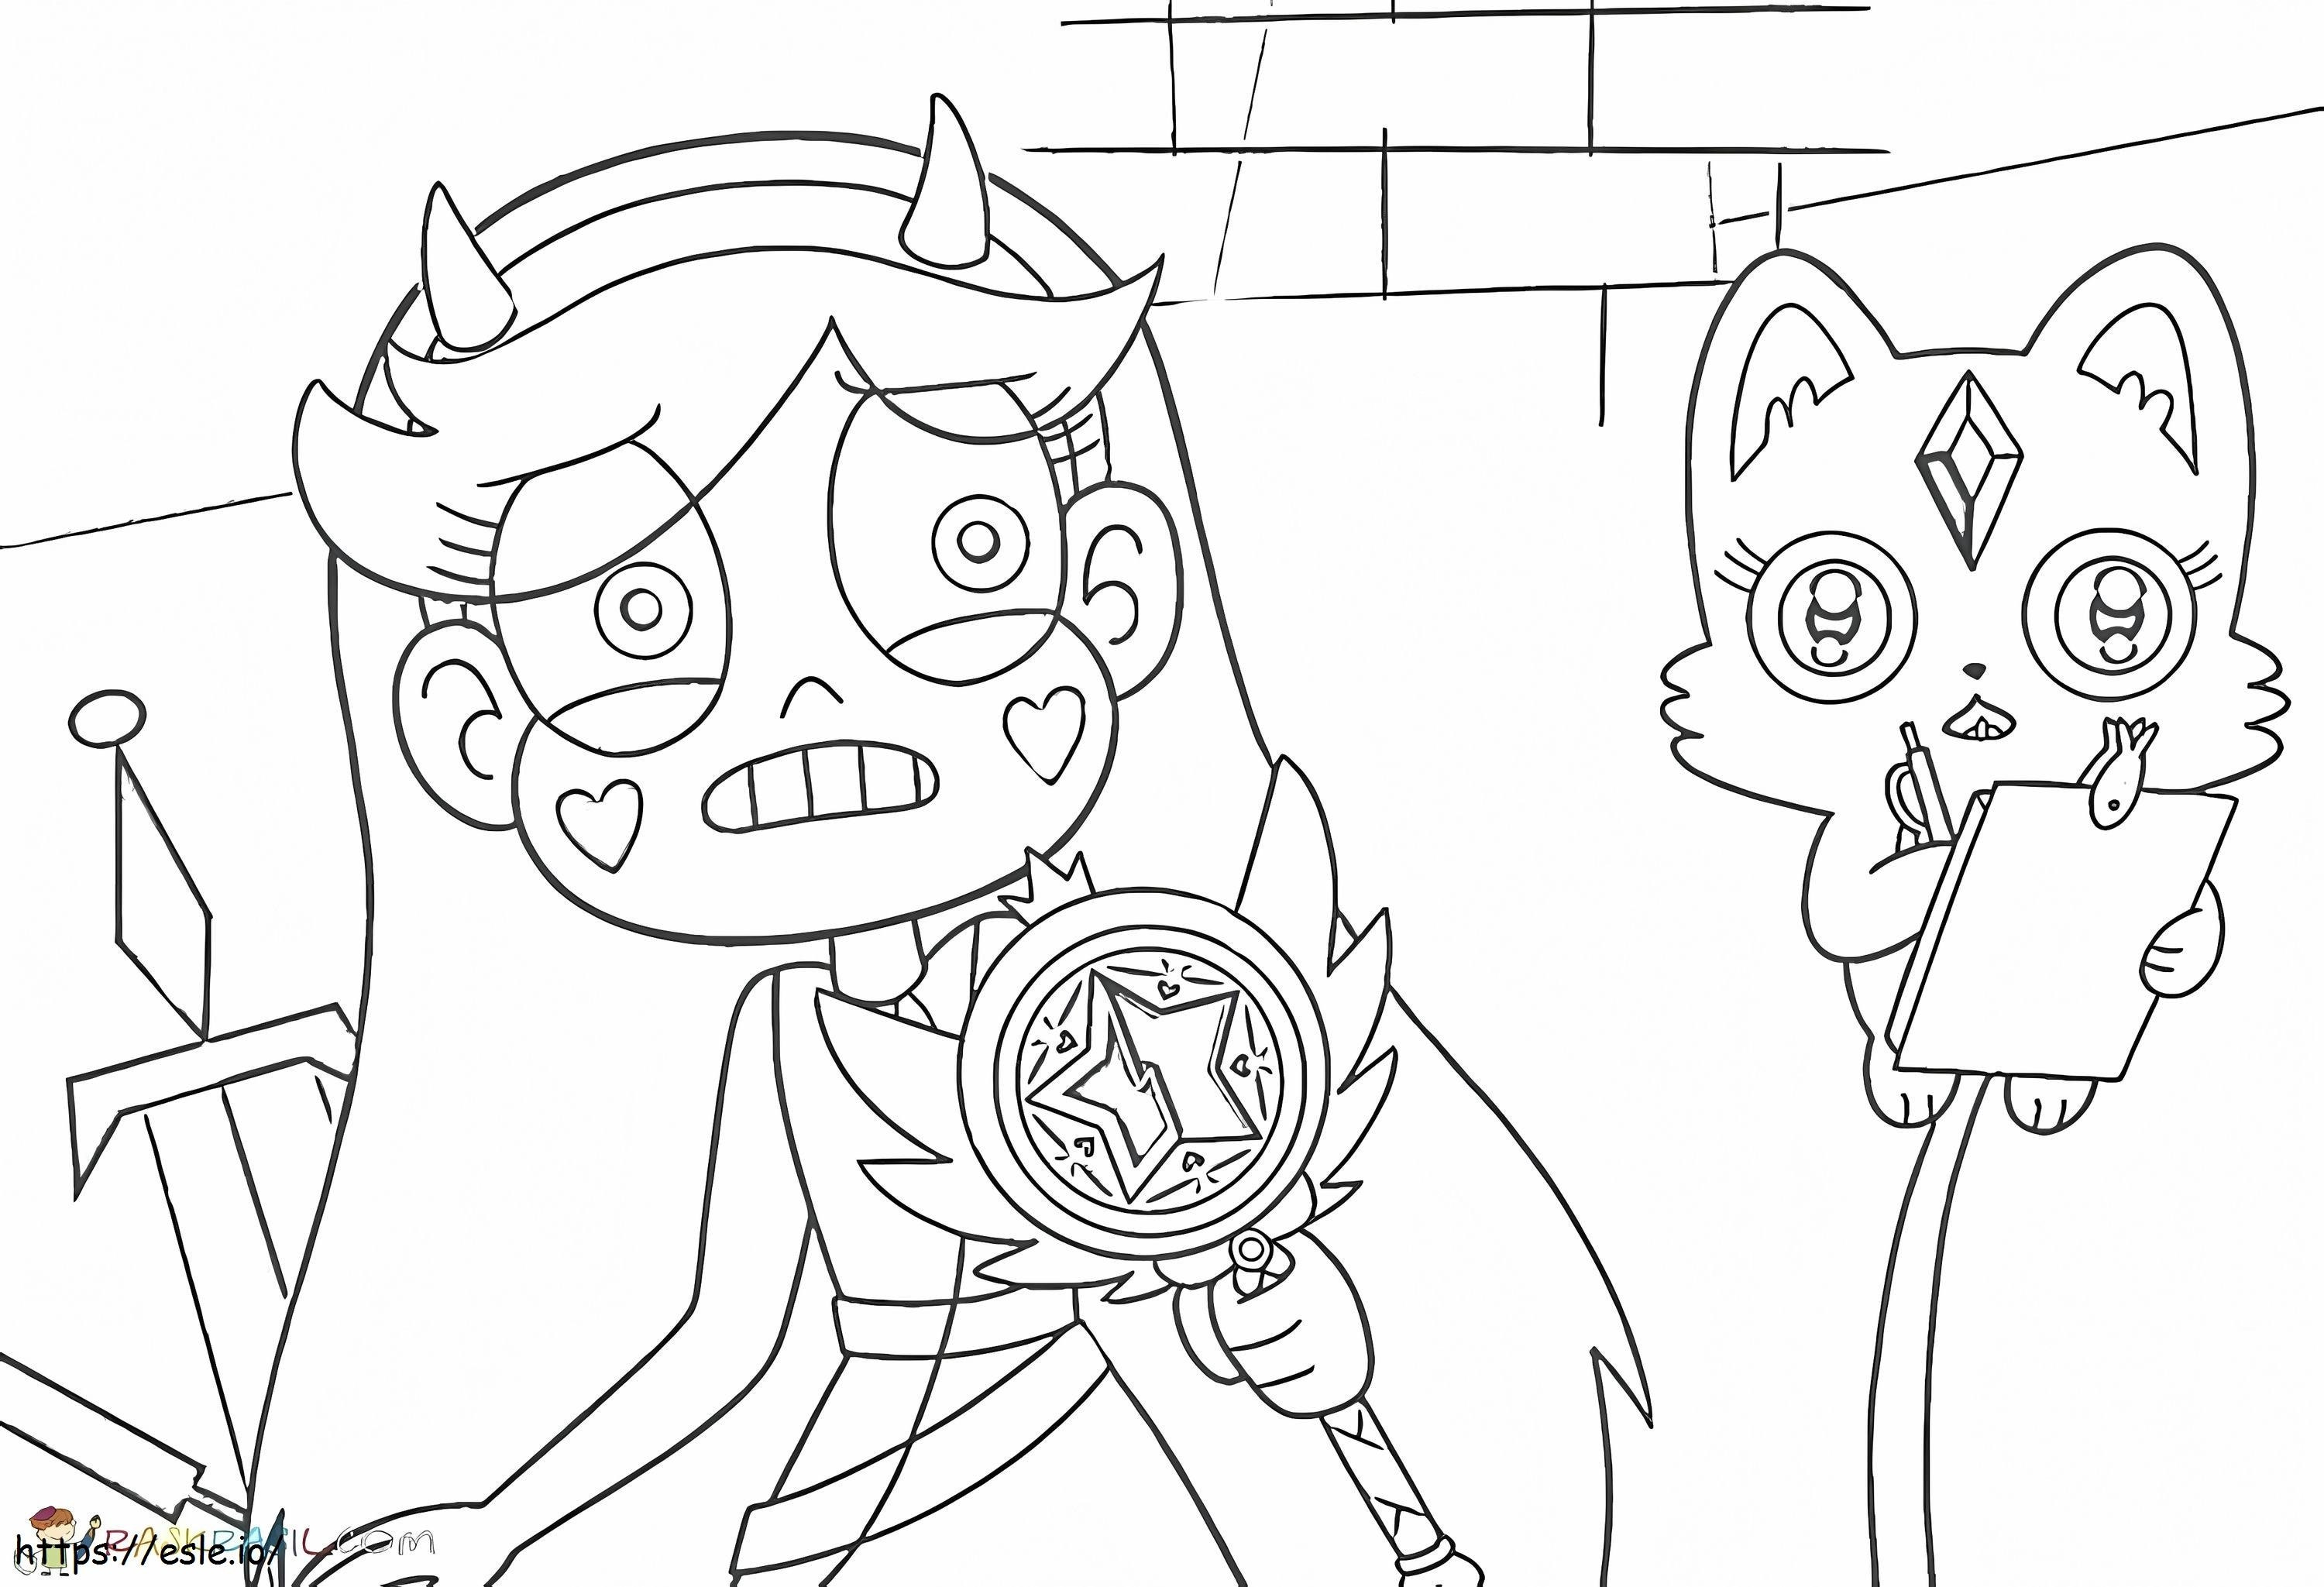 Star Vs. The Forces Of Evil 12 coloring page